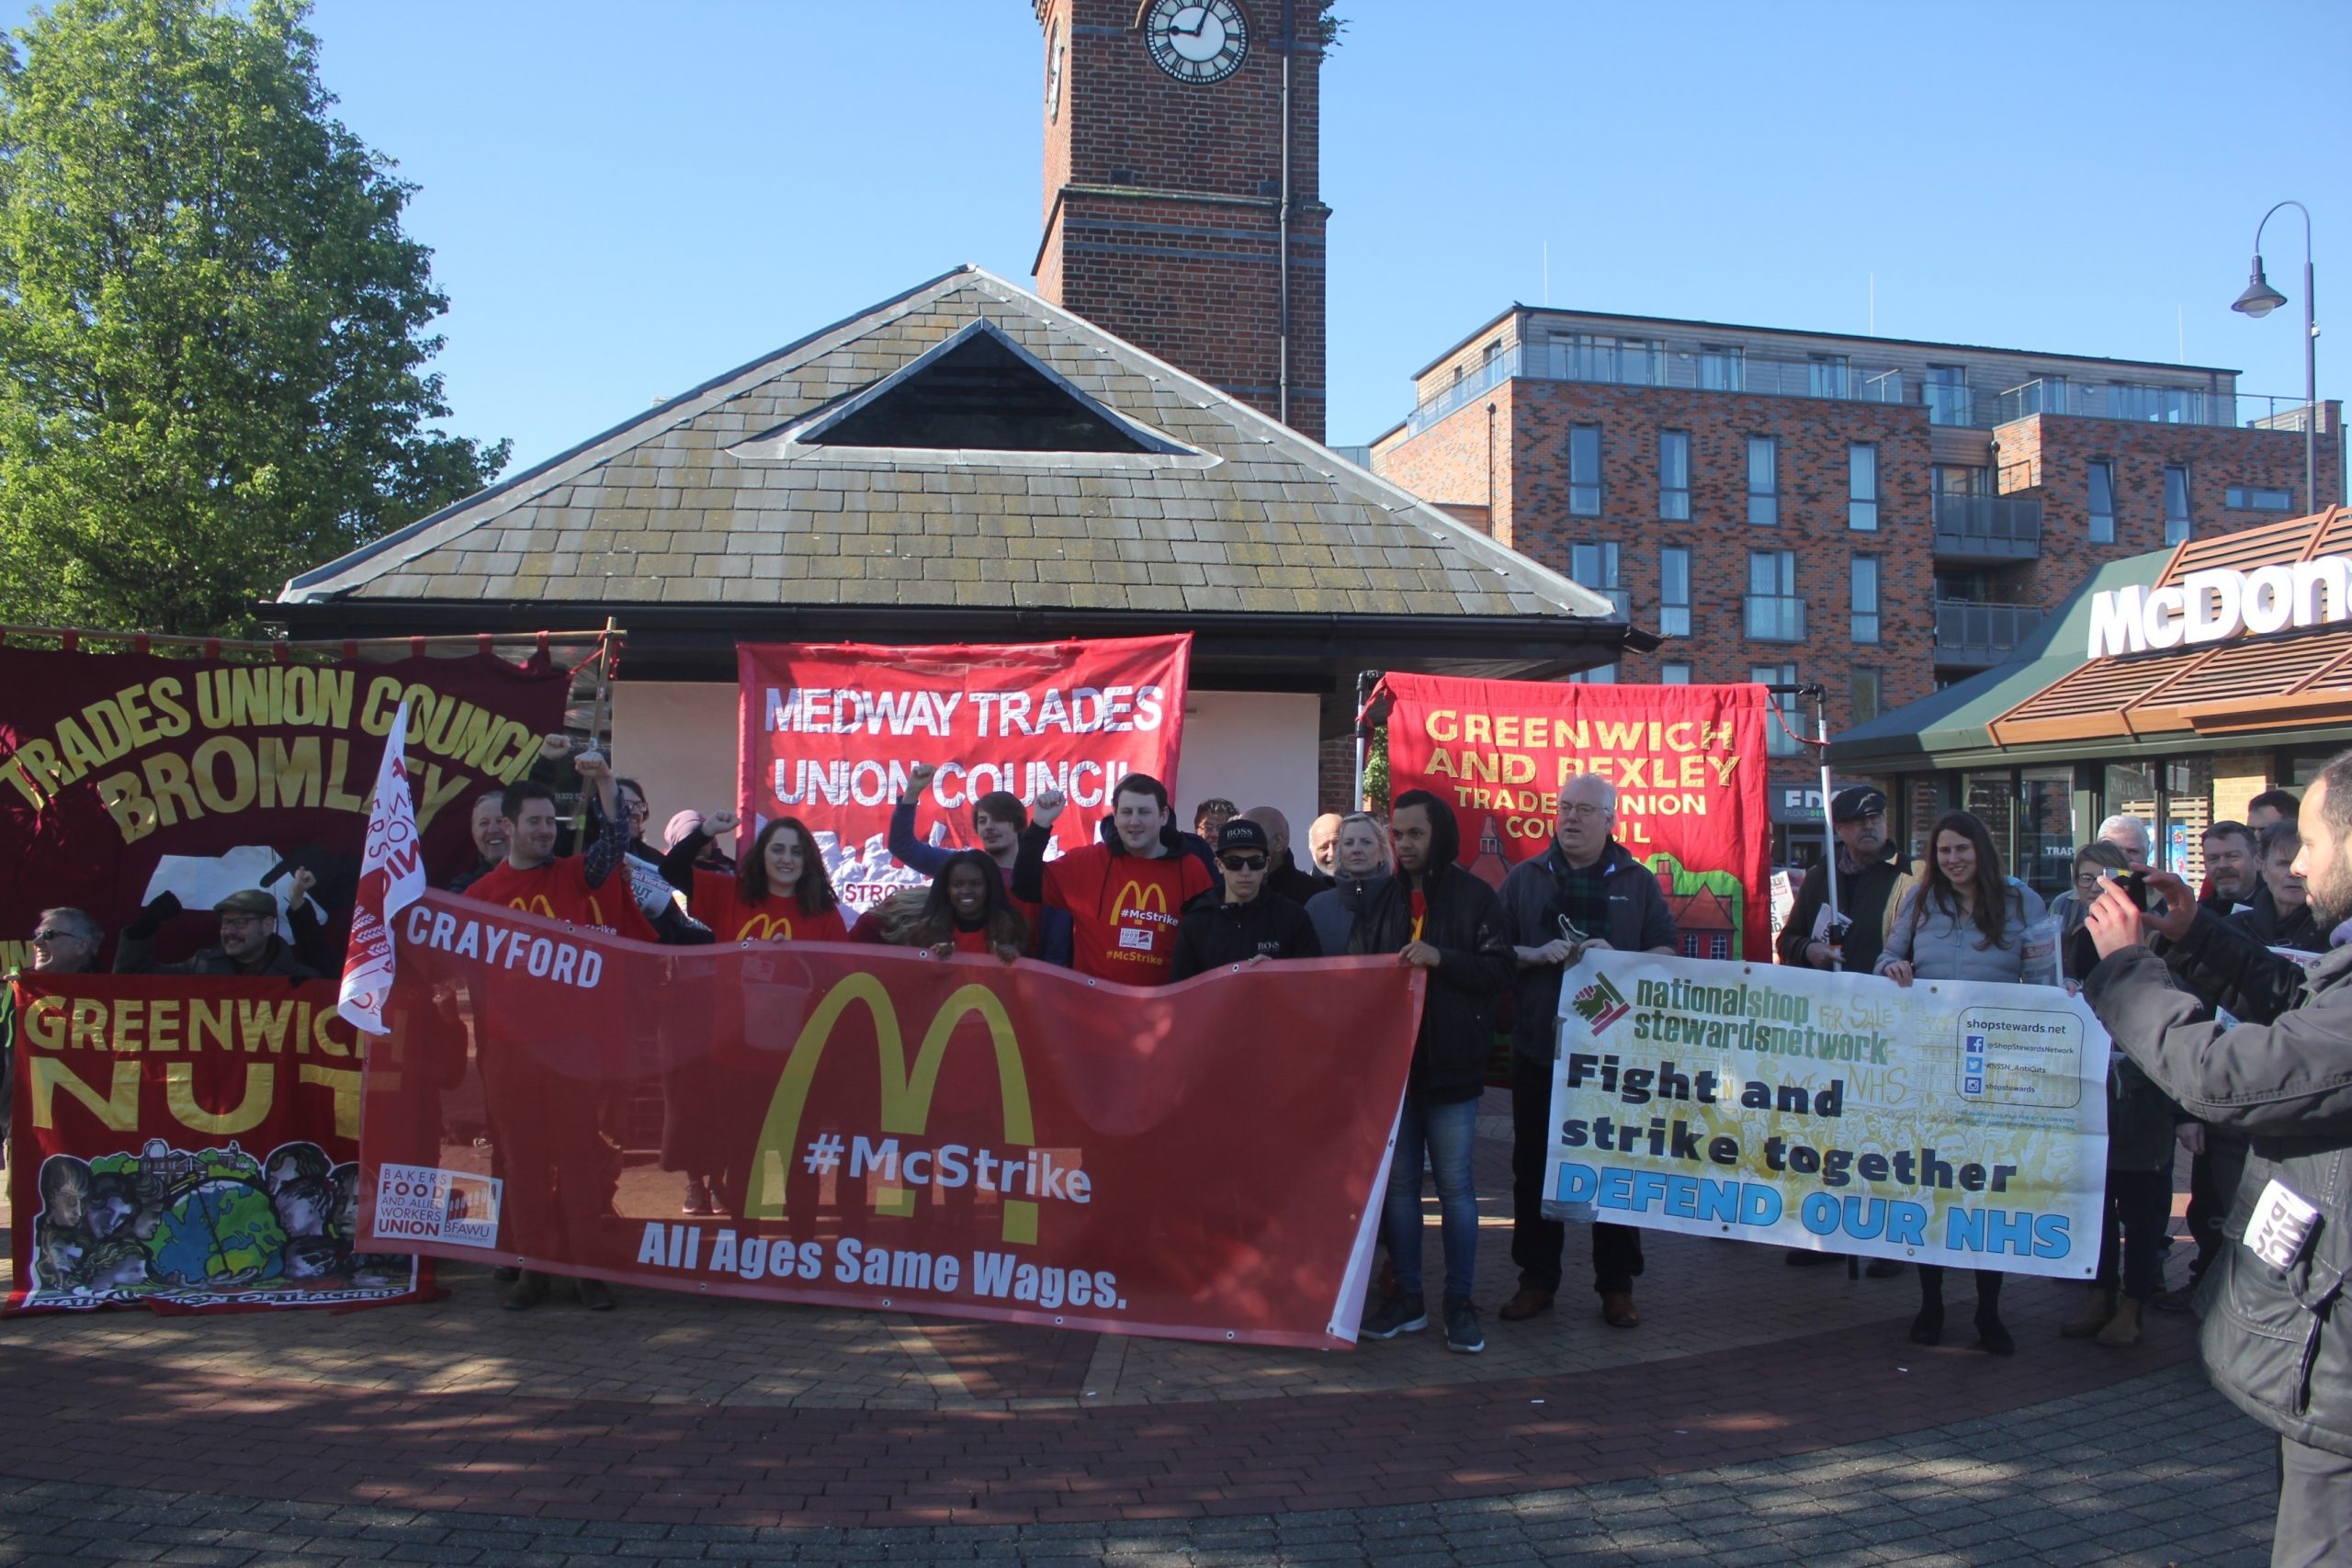 The McStrike picket line at Crayford